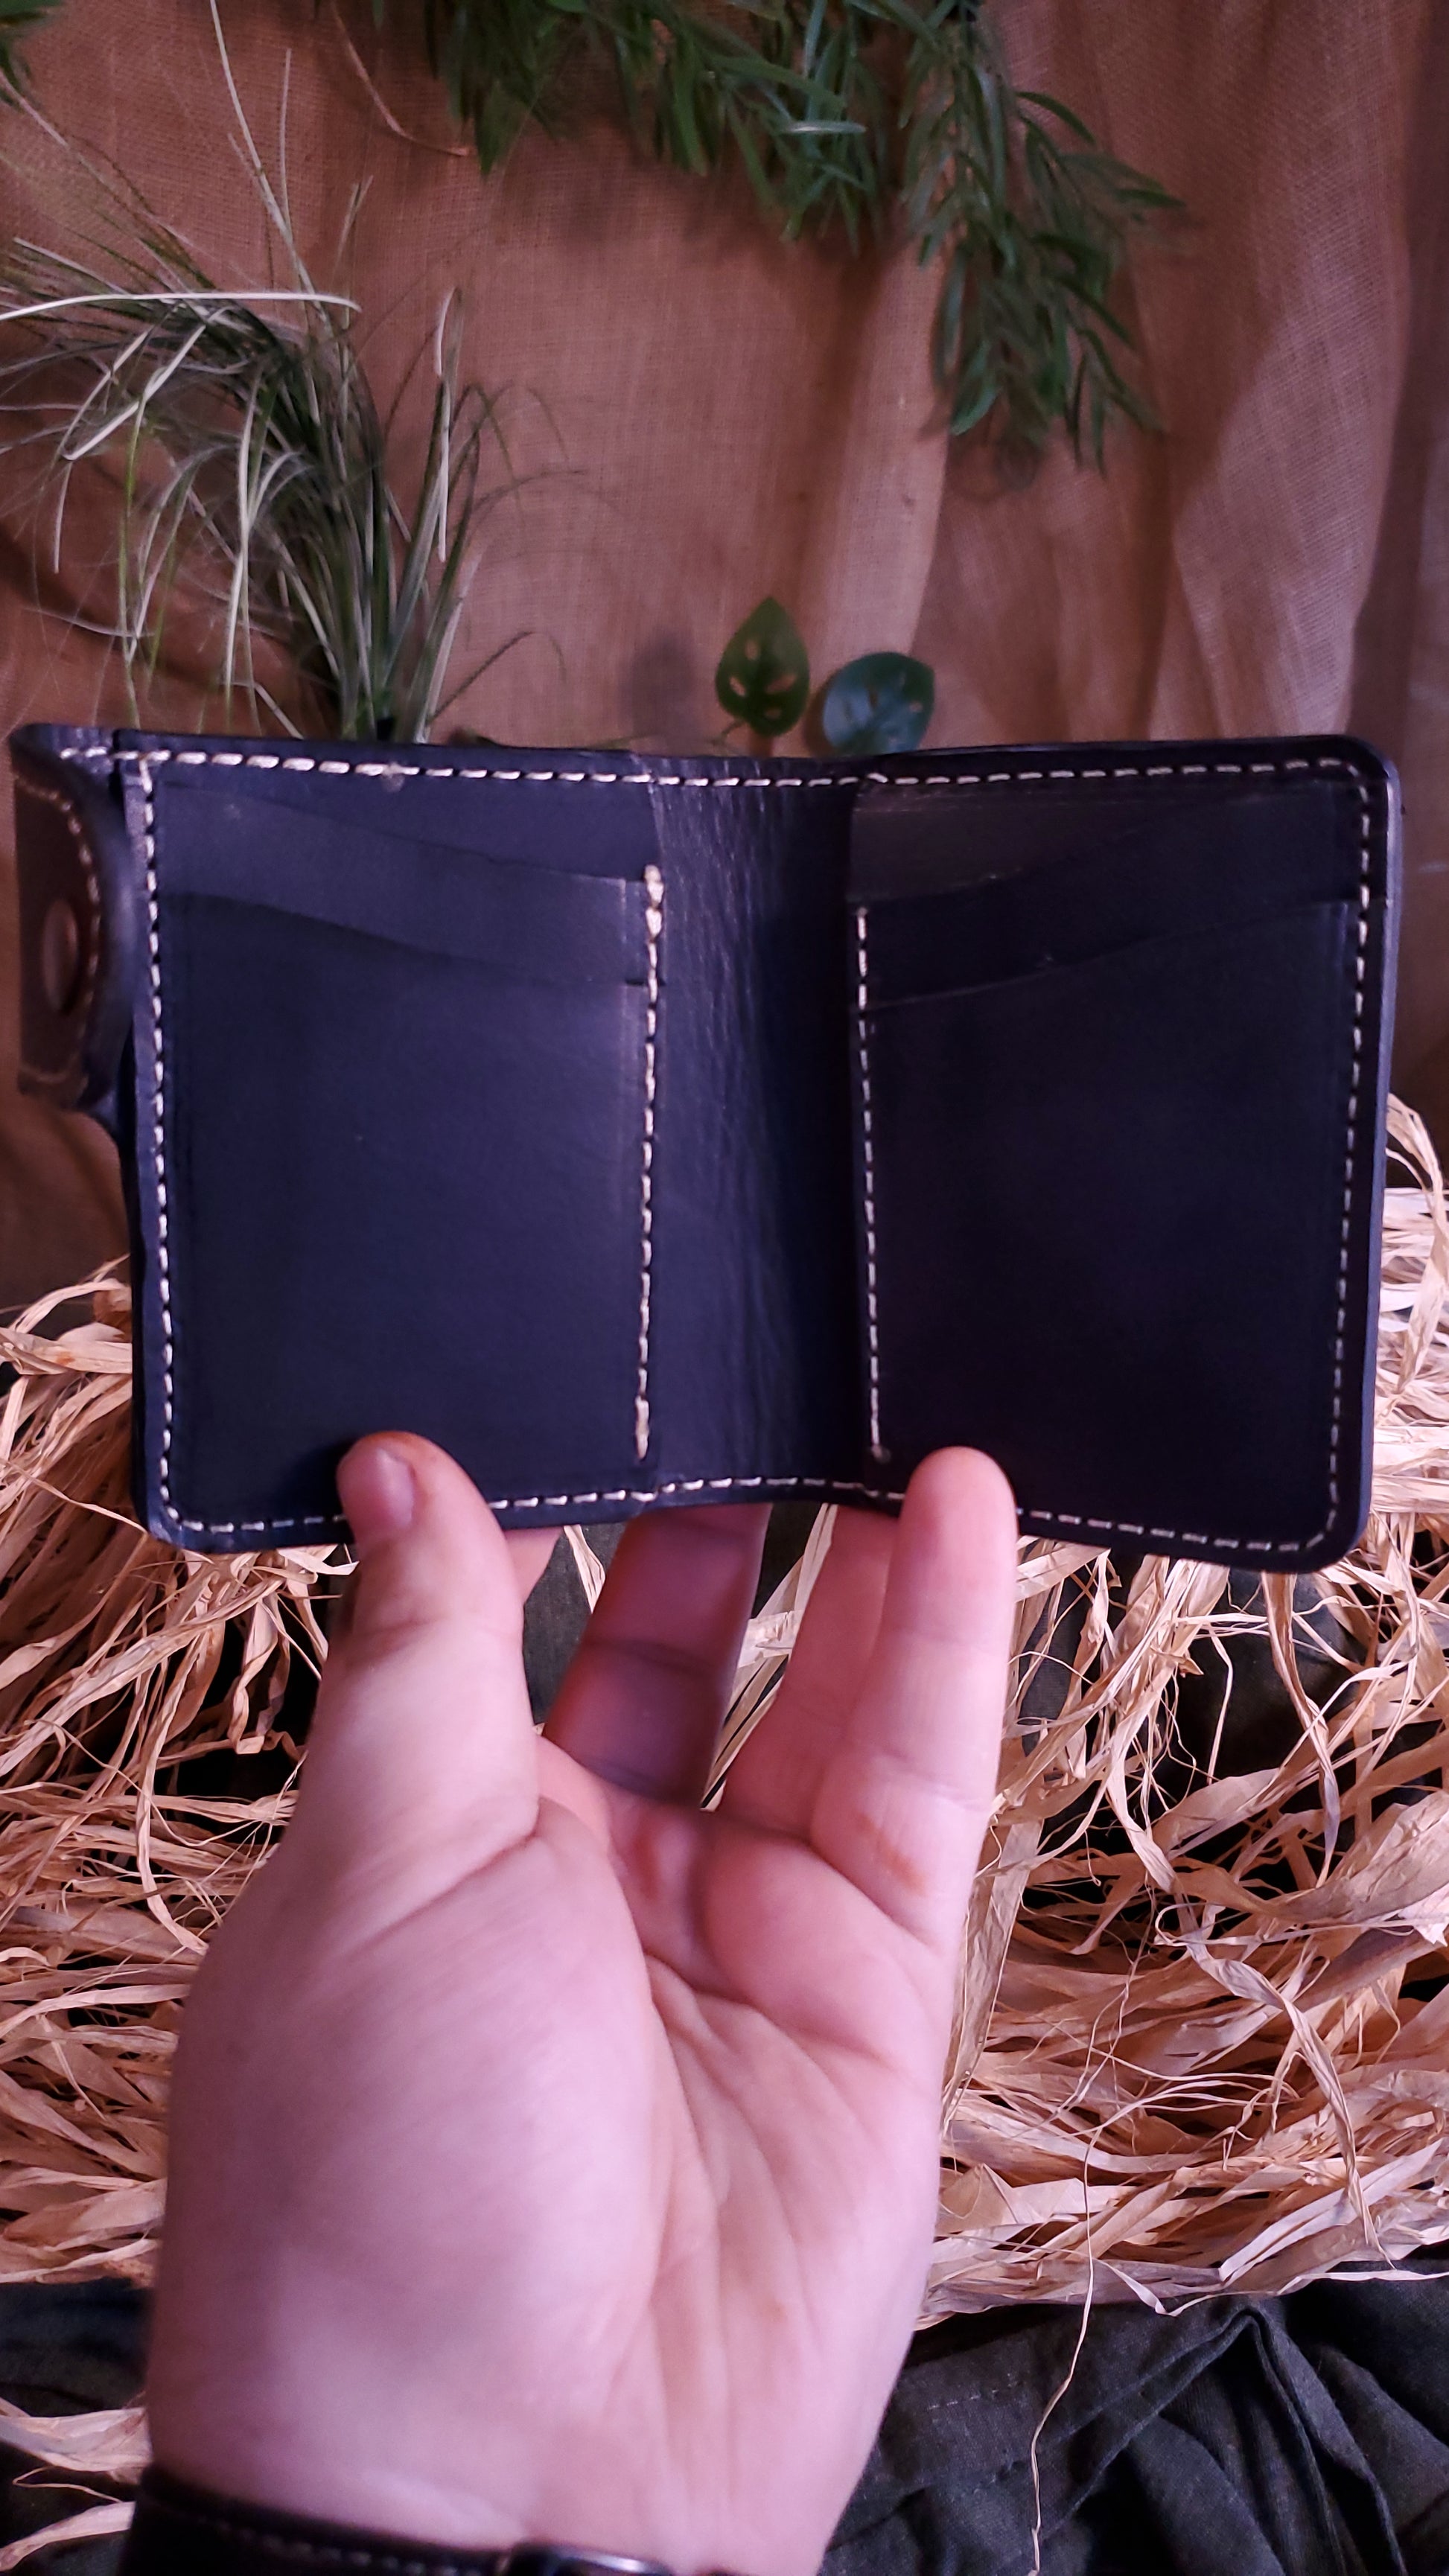 Interior of the snap style wallet, featuring 4 card slots, 2 on each side, as well as 2 hidden pockets behind the card slots, 1 on each side